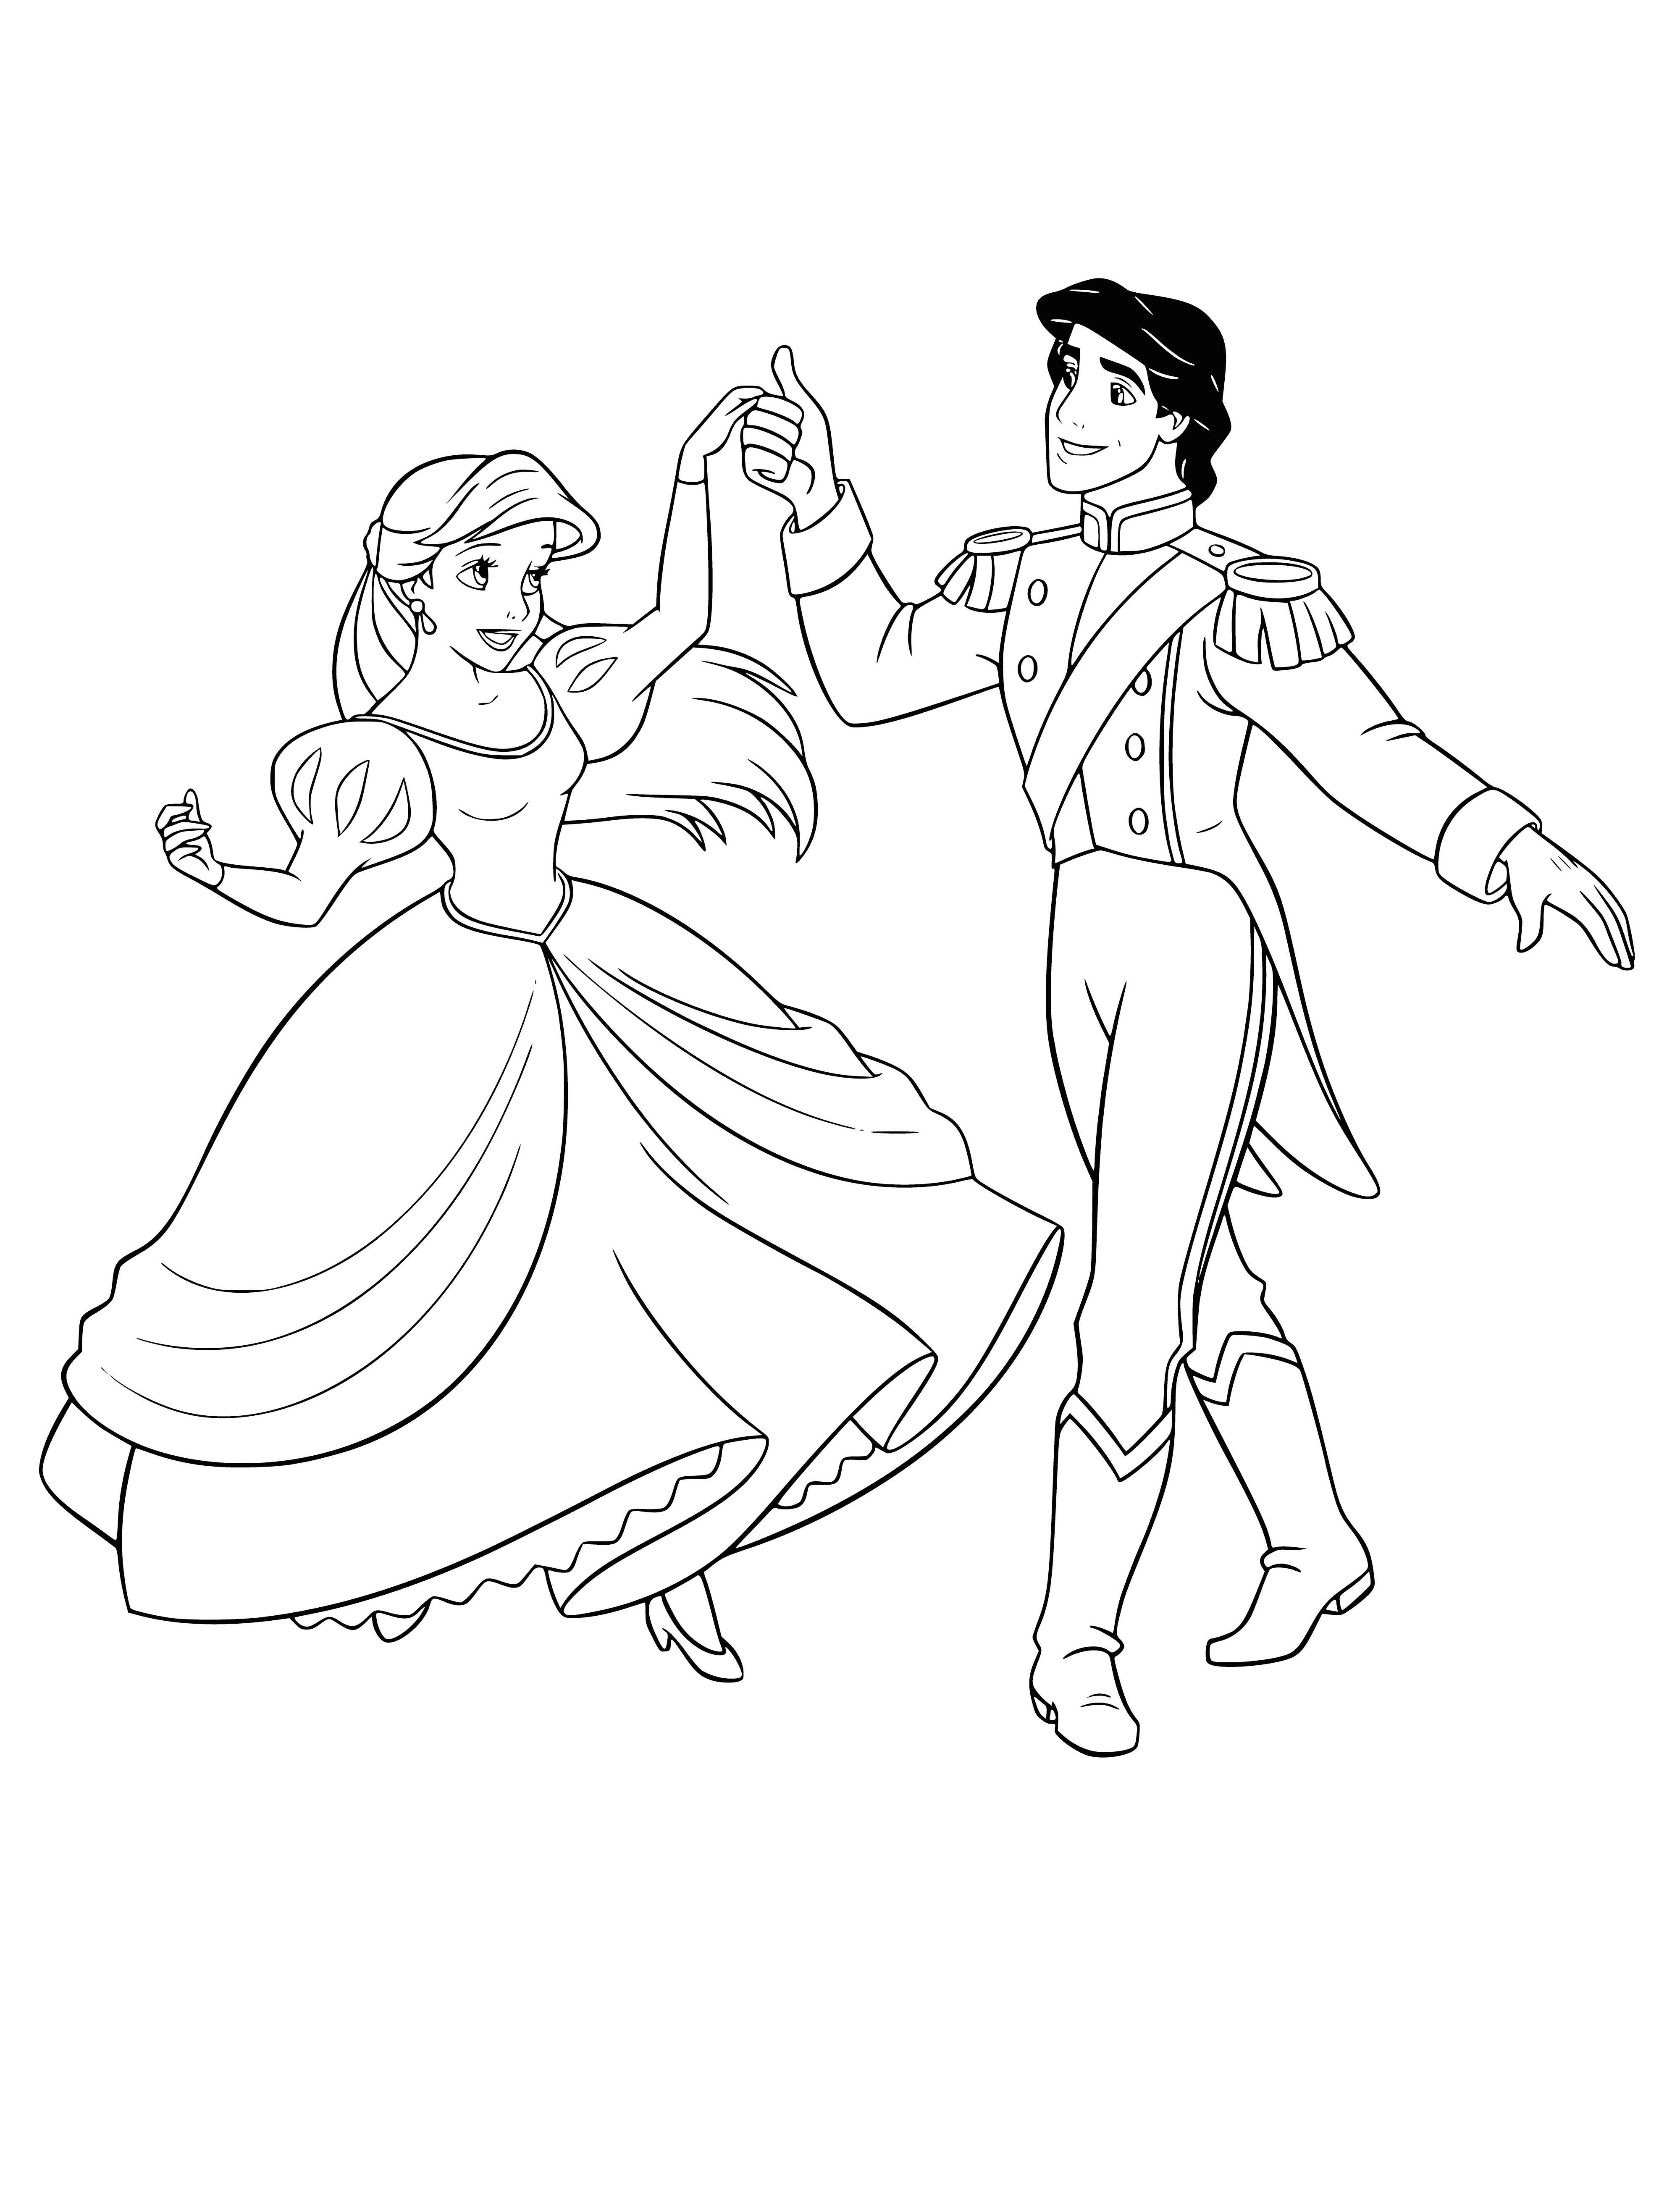 Ariel and the prince are dancing coloring page